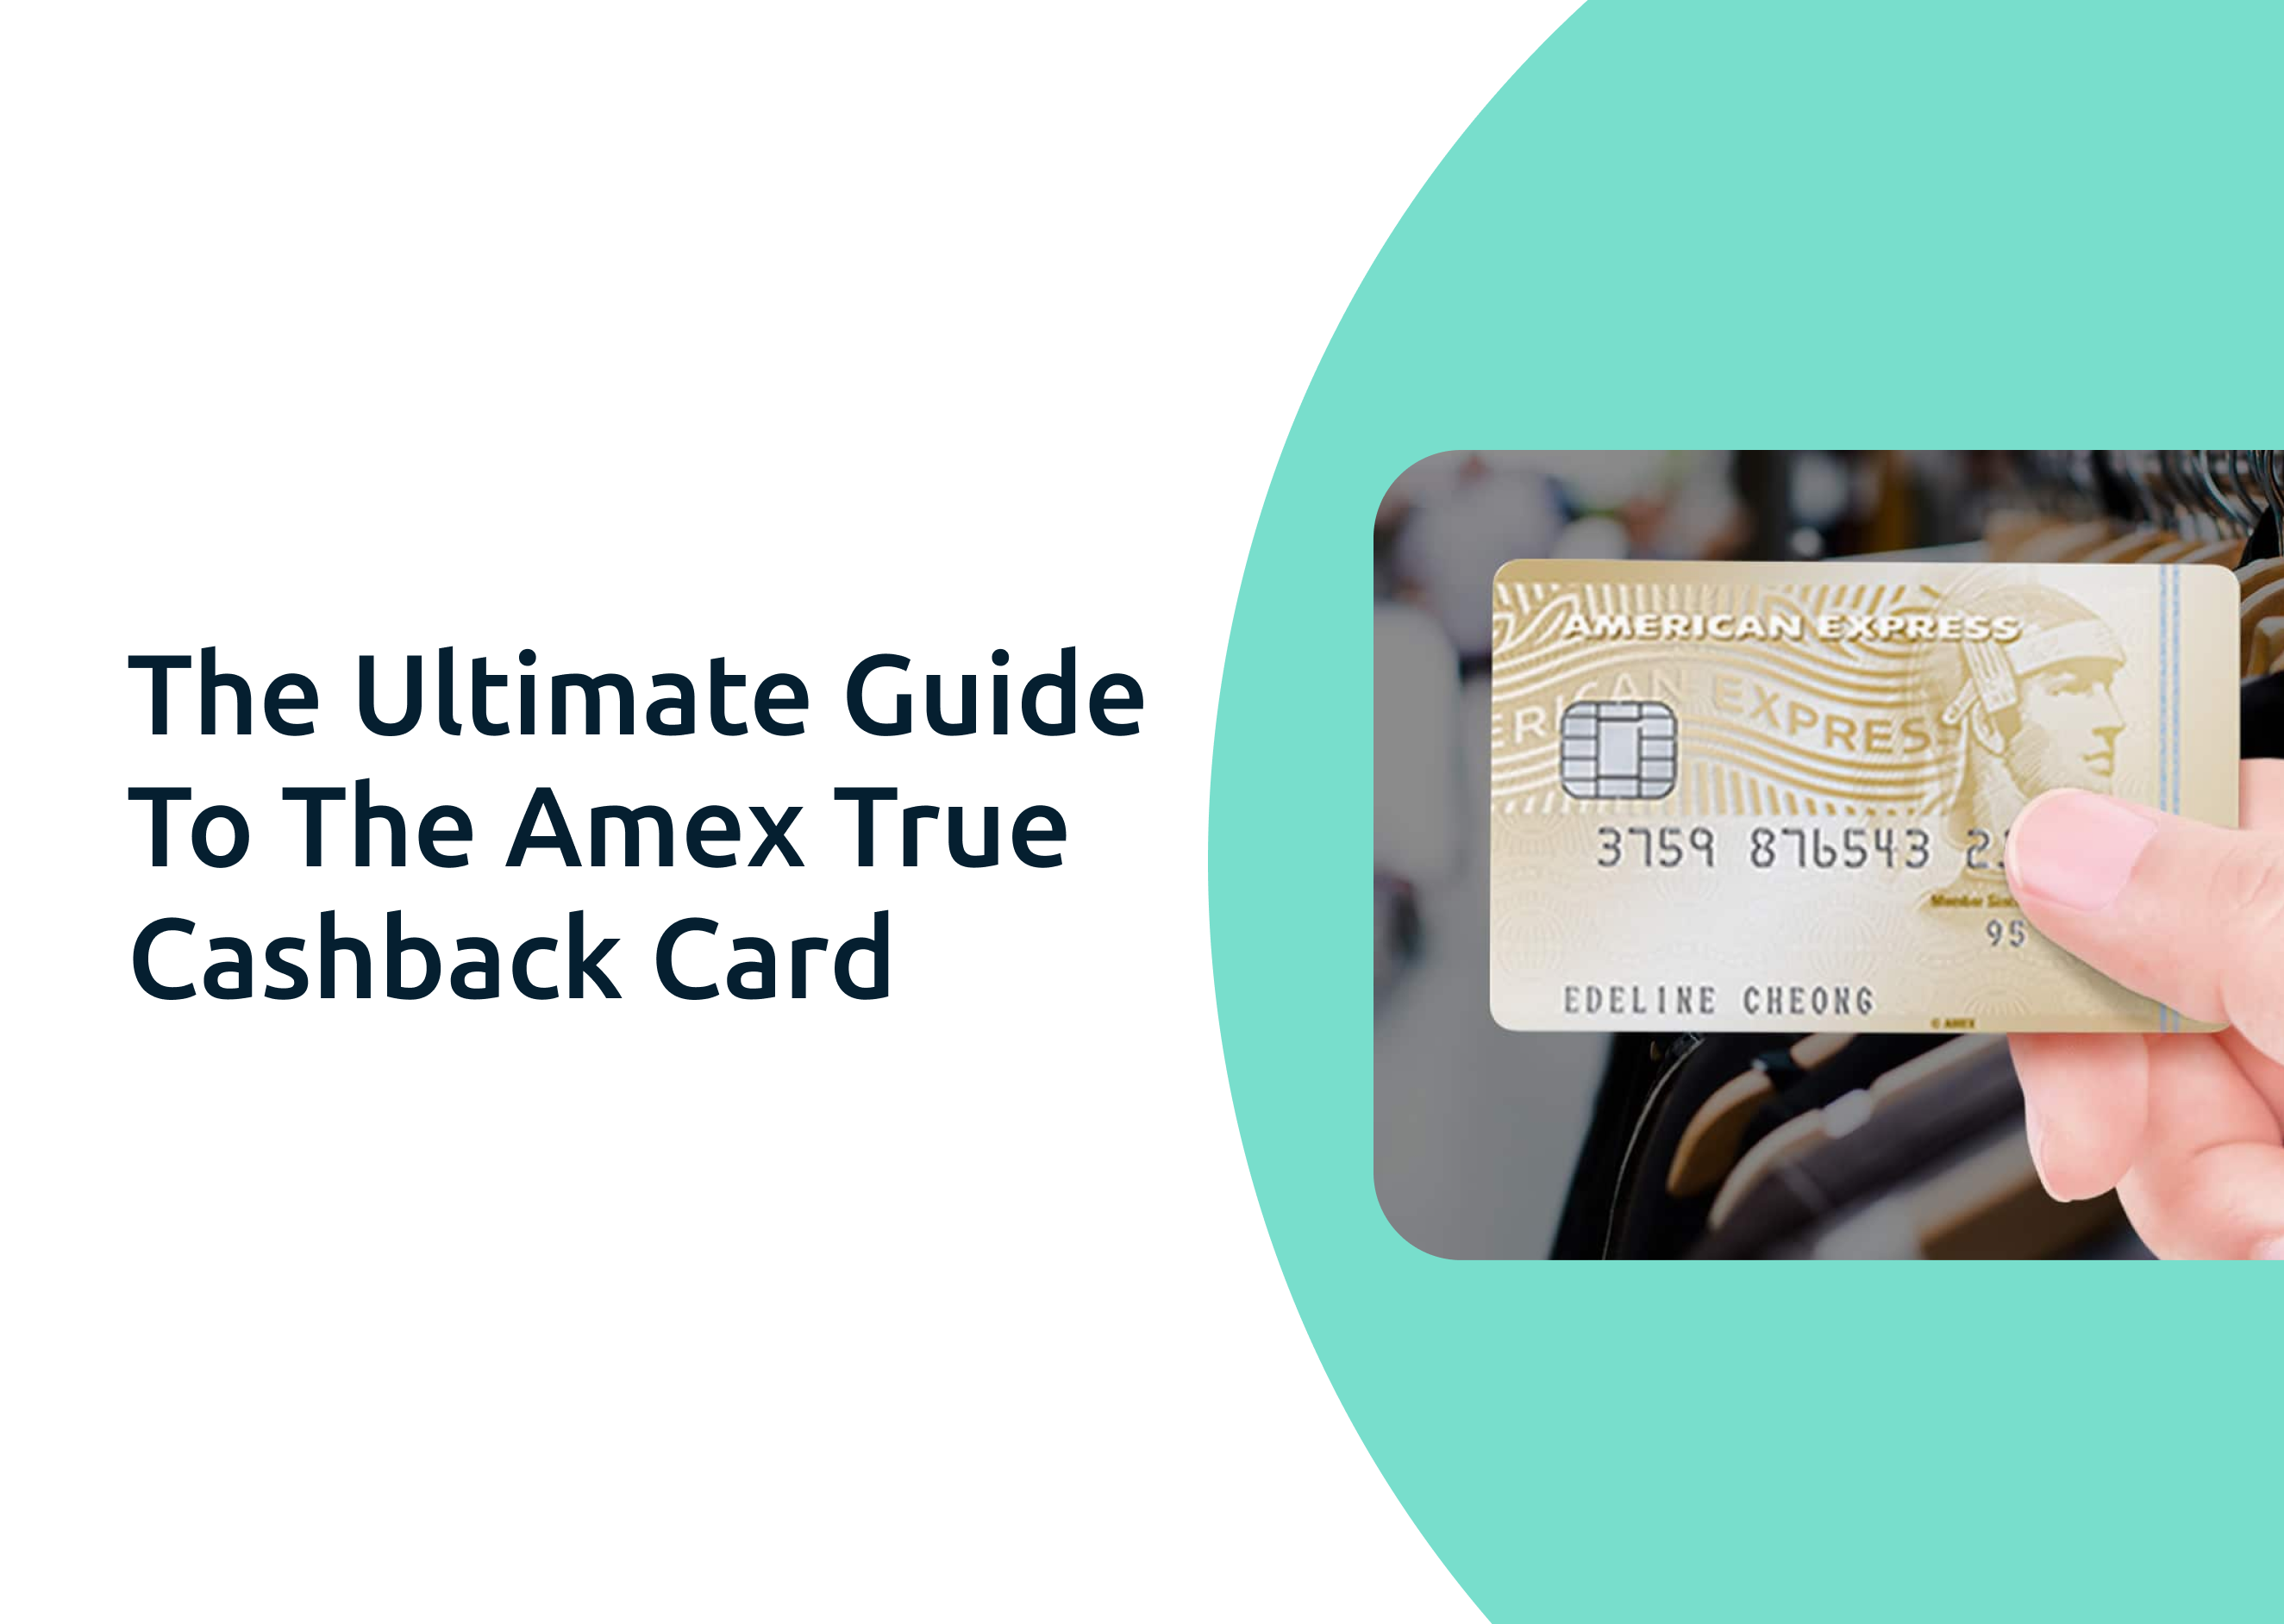 The Ultimate Guide To The Amex True Cashback Card | Financially Independent  Pharmacist